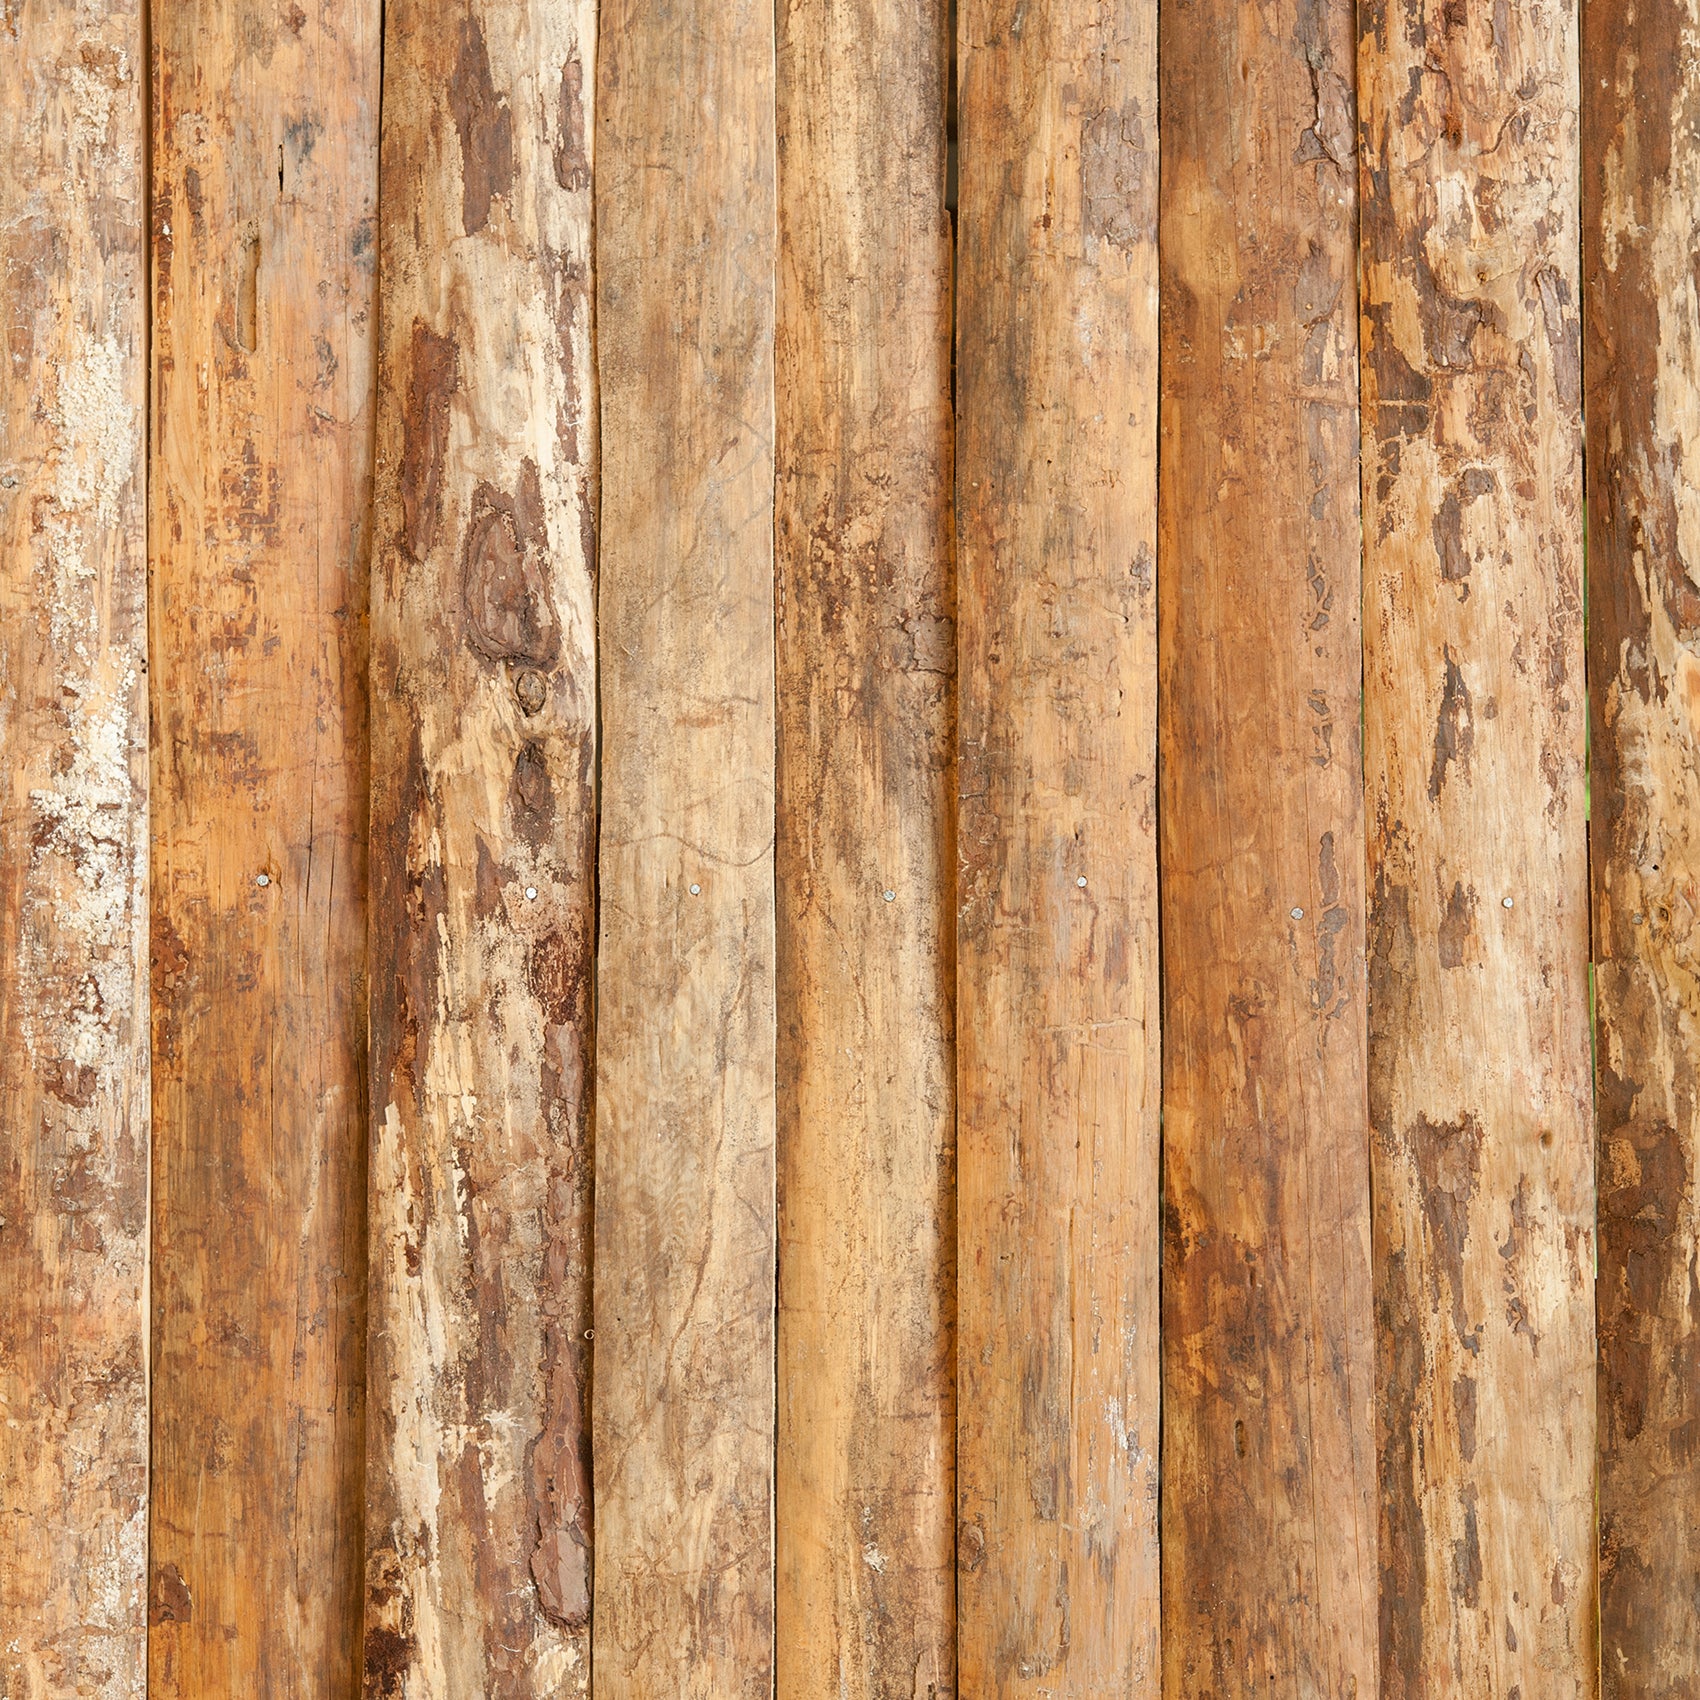 Rustic Distressed Wood Backdrop Photography Background #1764 Tree Trunk